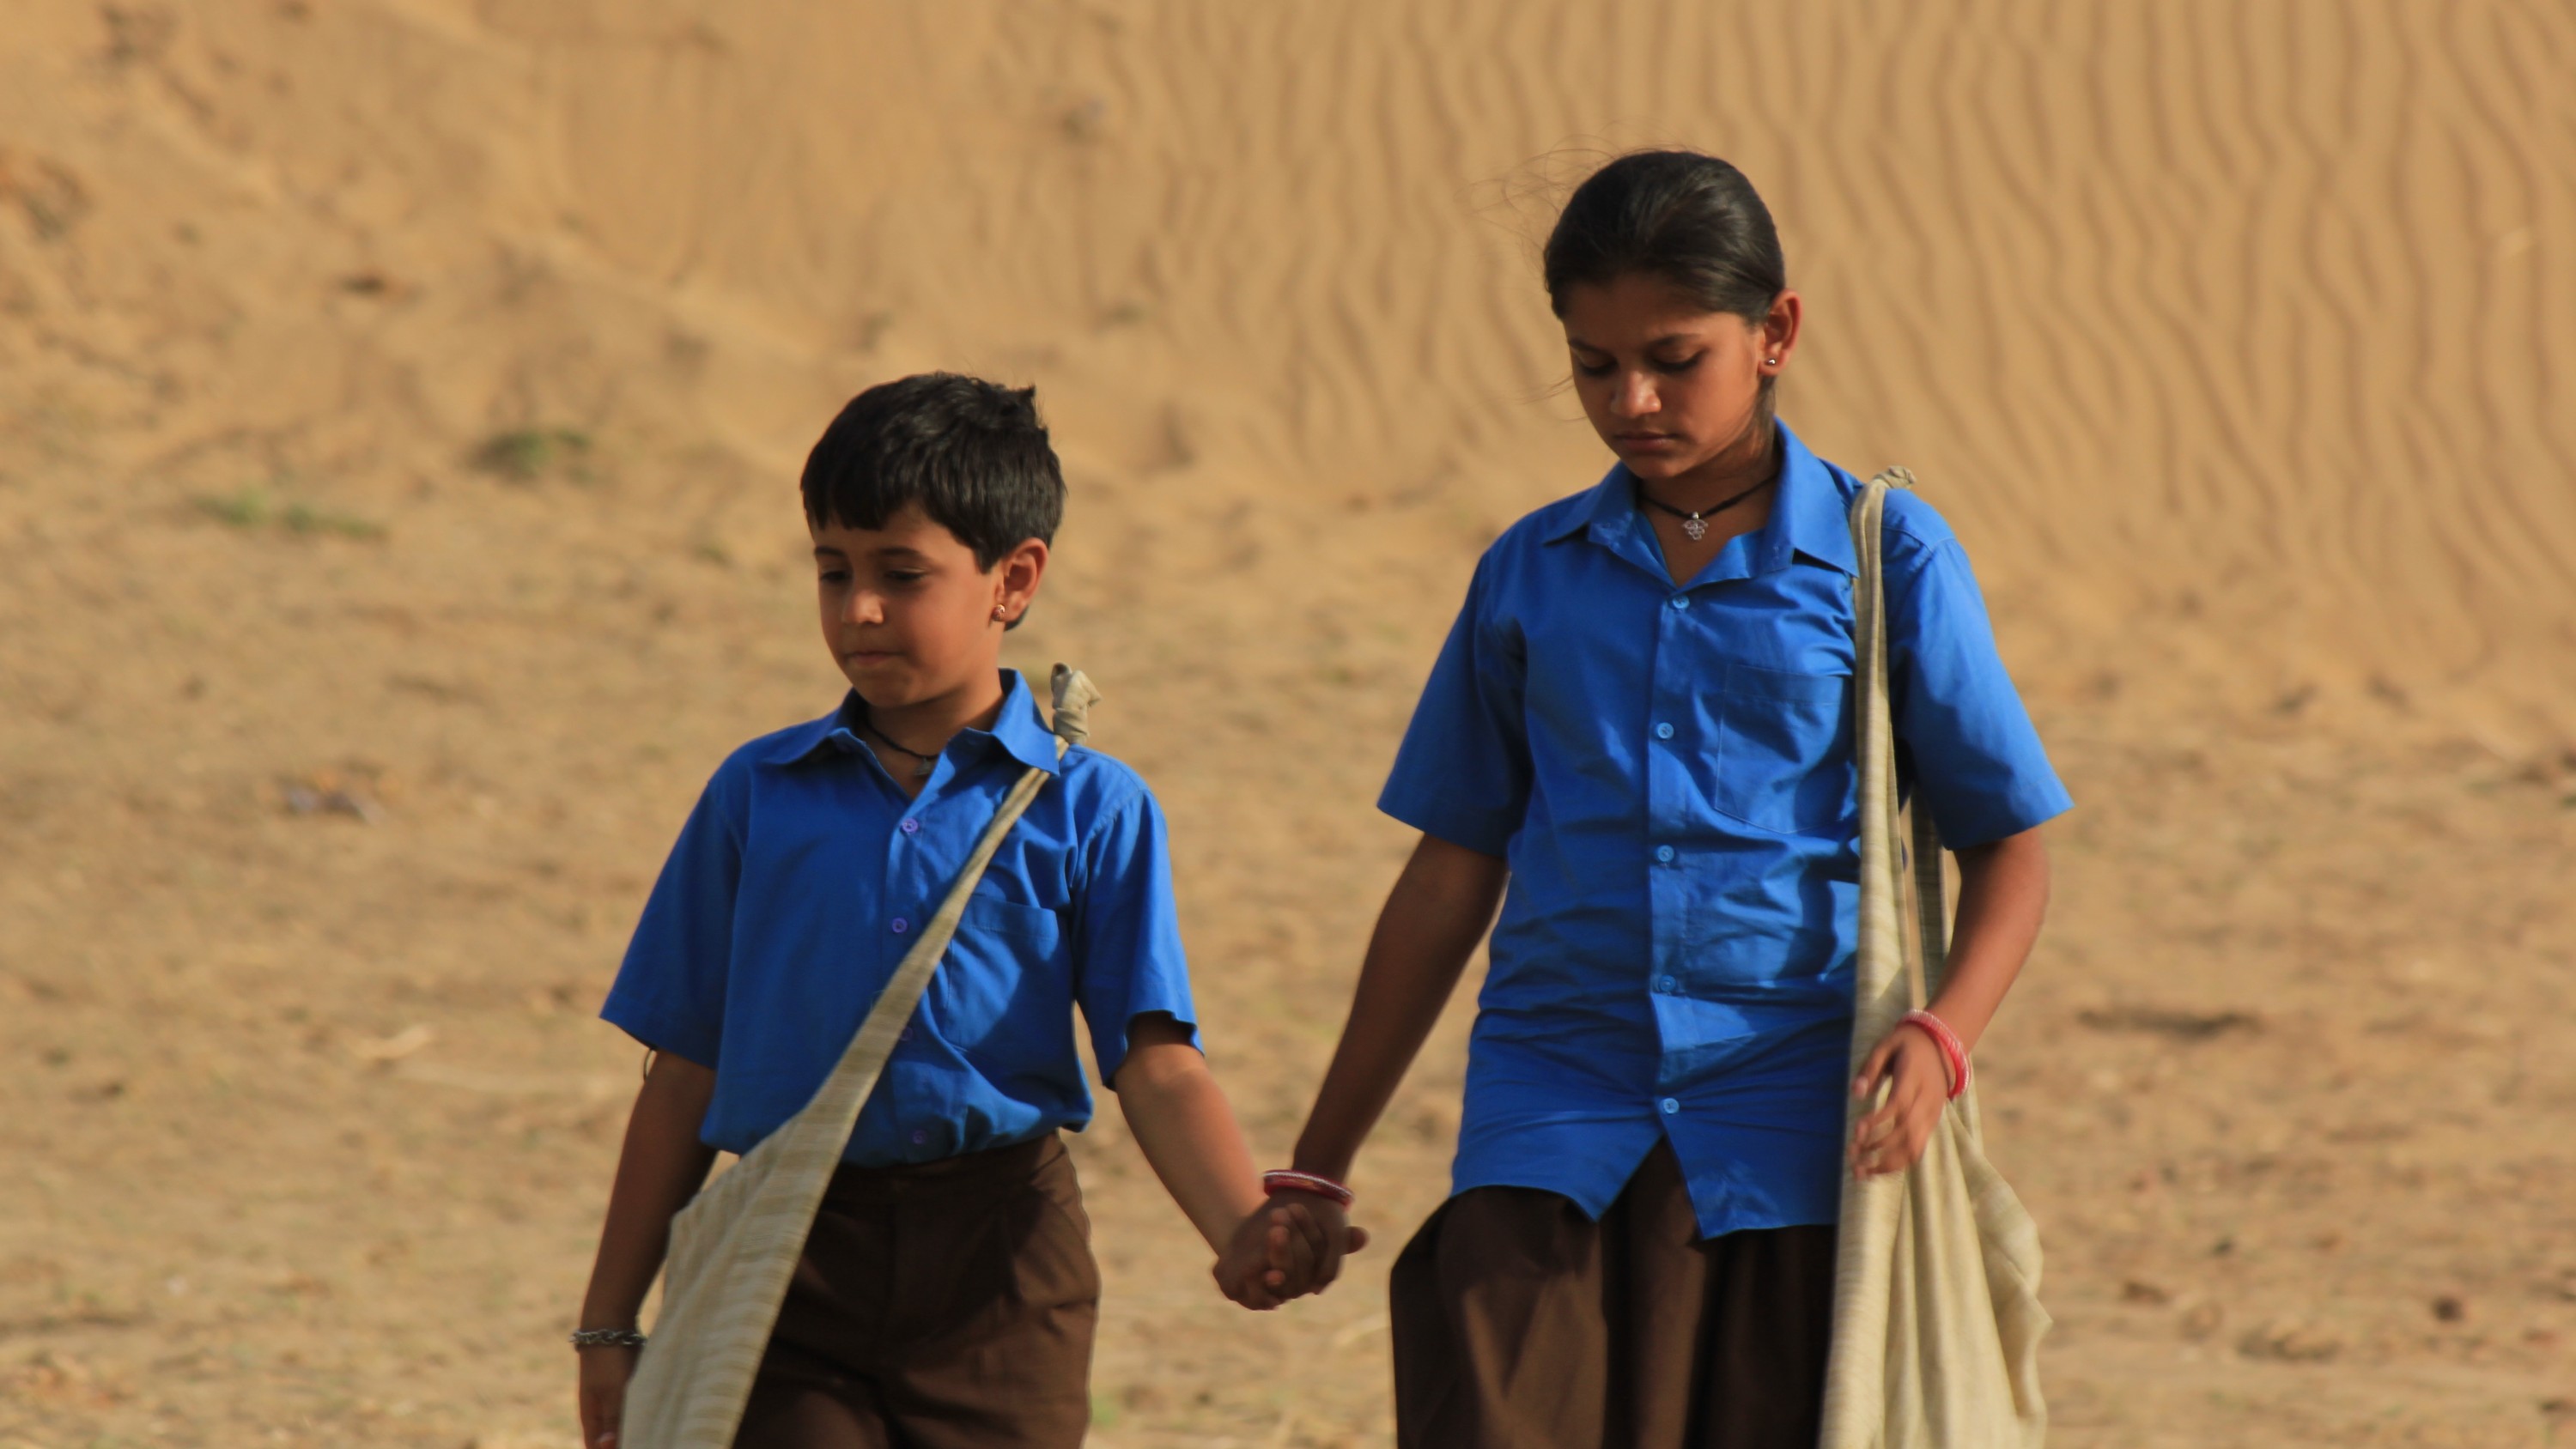 This image from Dhanak shows the characters holding hands in uniform.